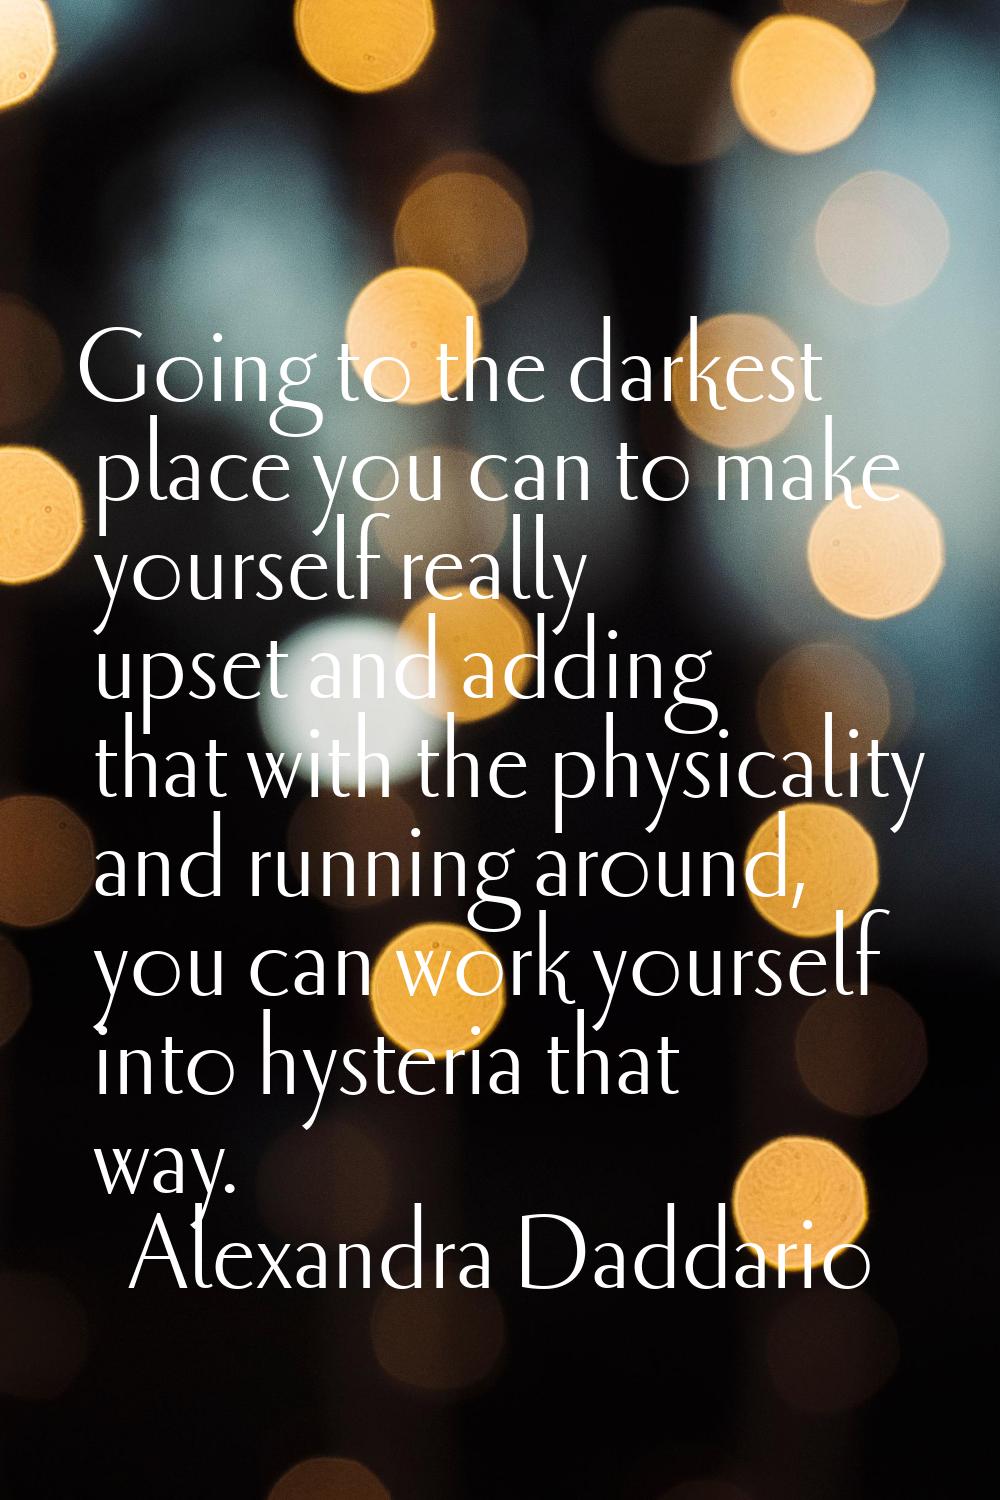 Going to the darkest place you can to make yourself really upset and adding that with the physicali